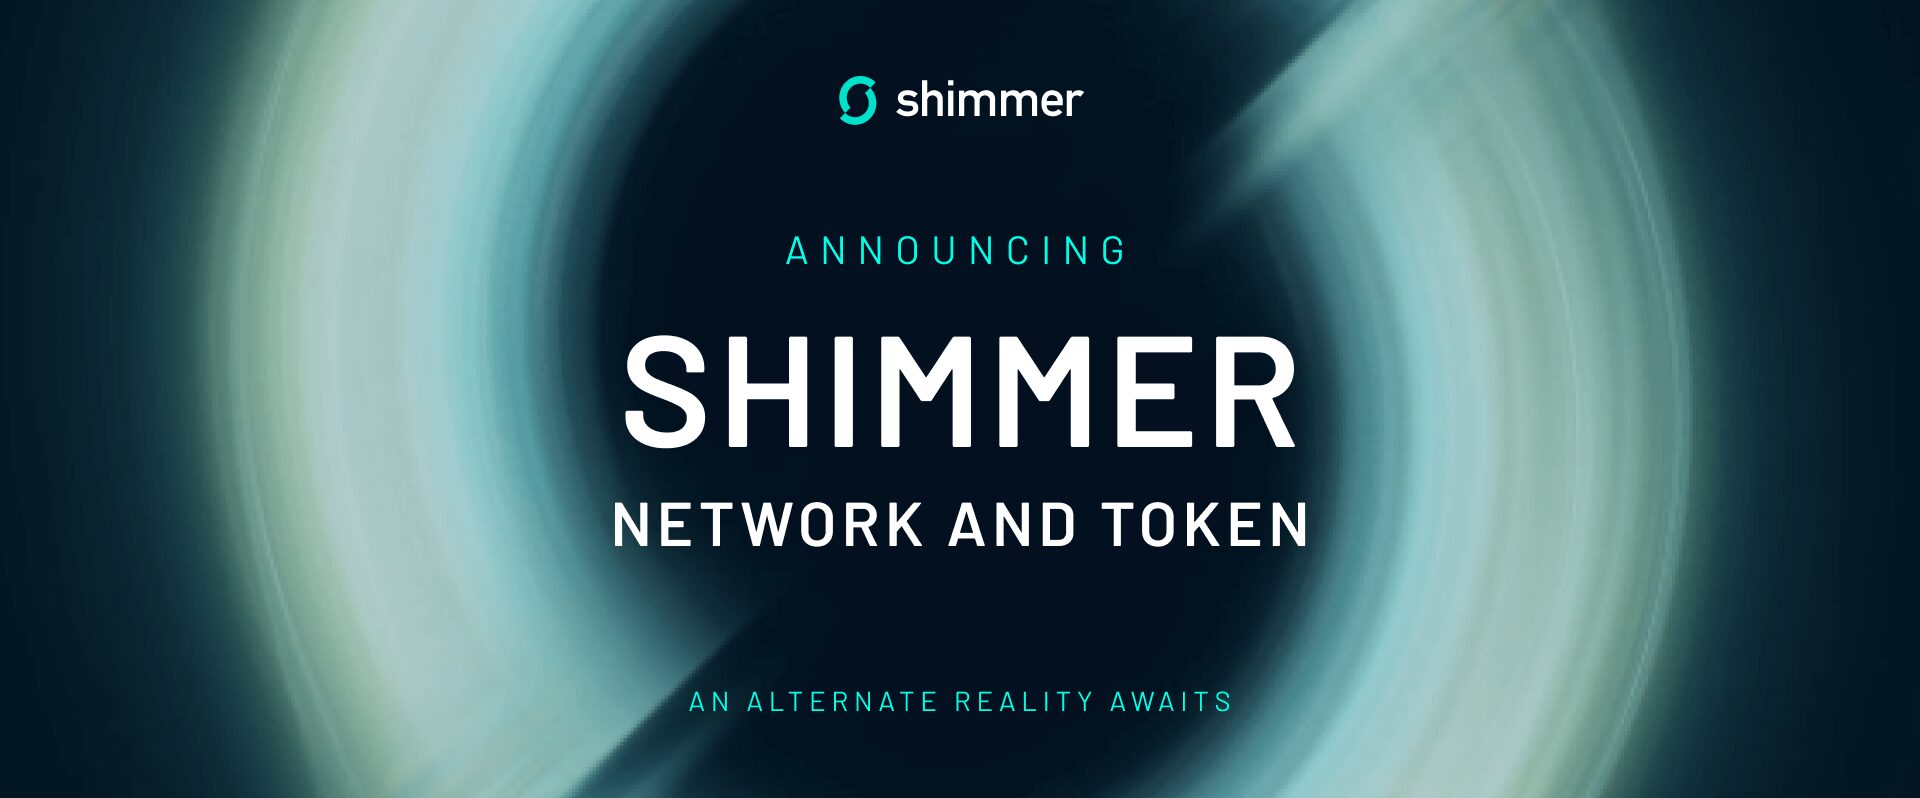 Introducing Shimmer Network and Token